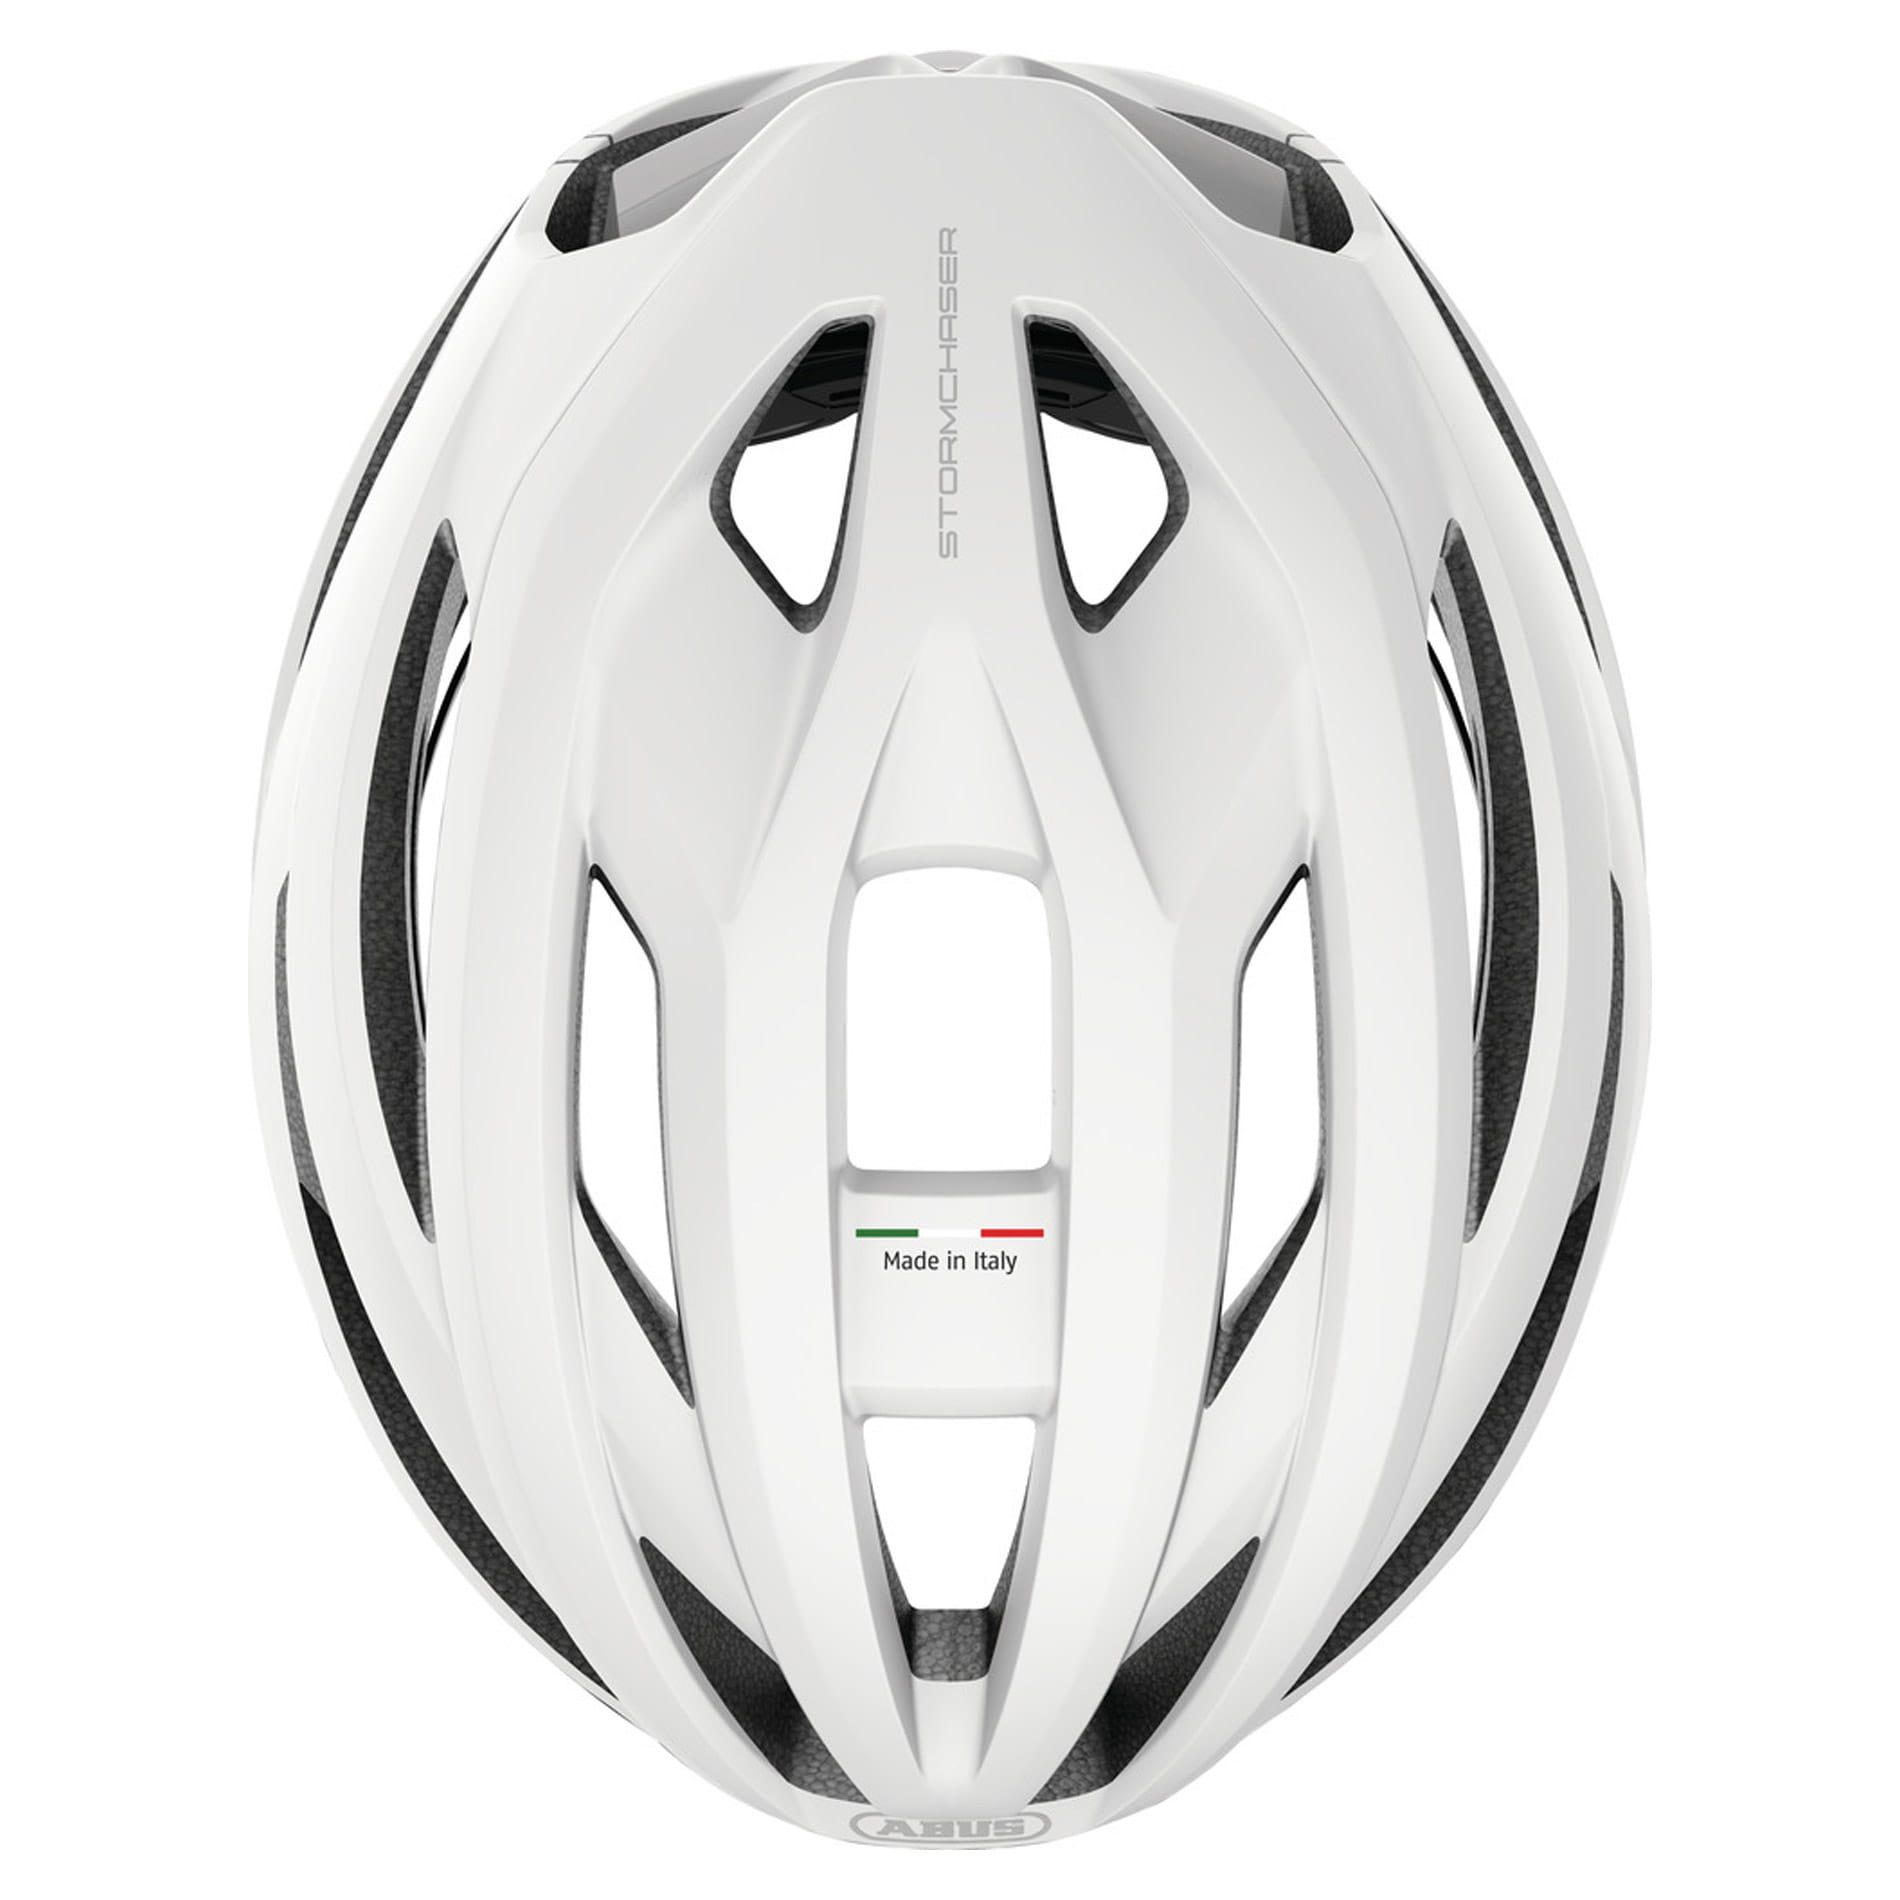 ABUS StormChaser ACE Road Helm